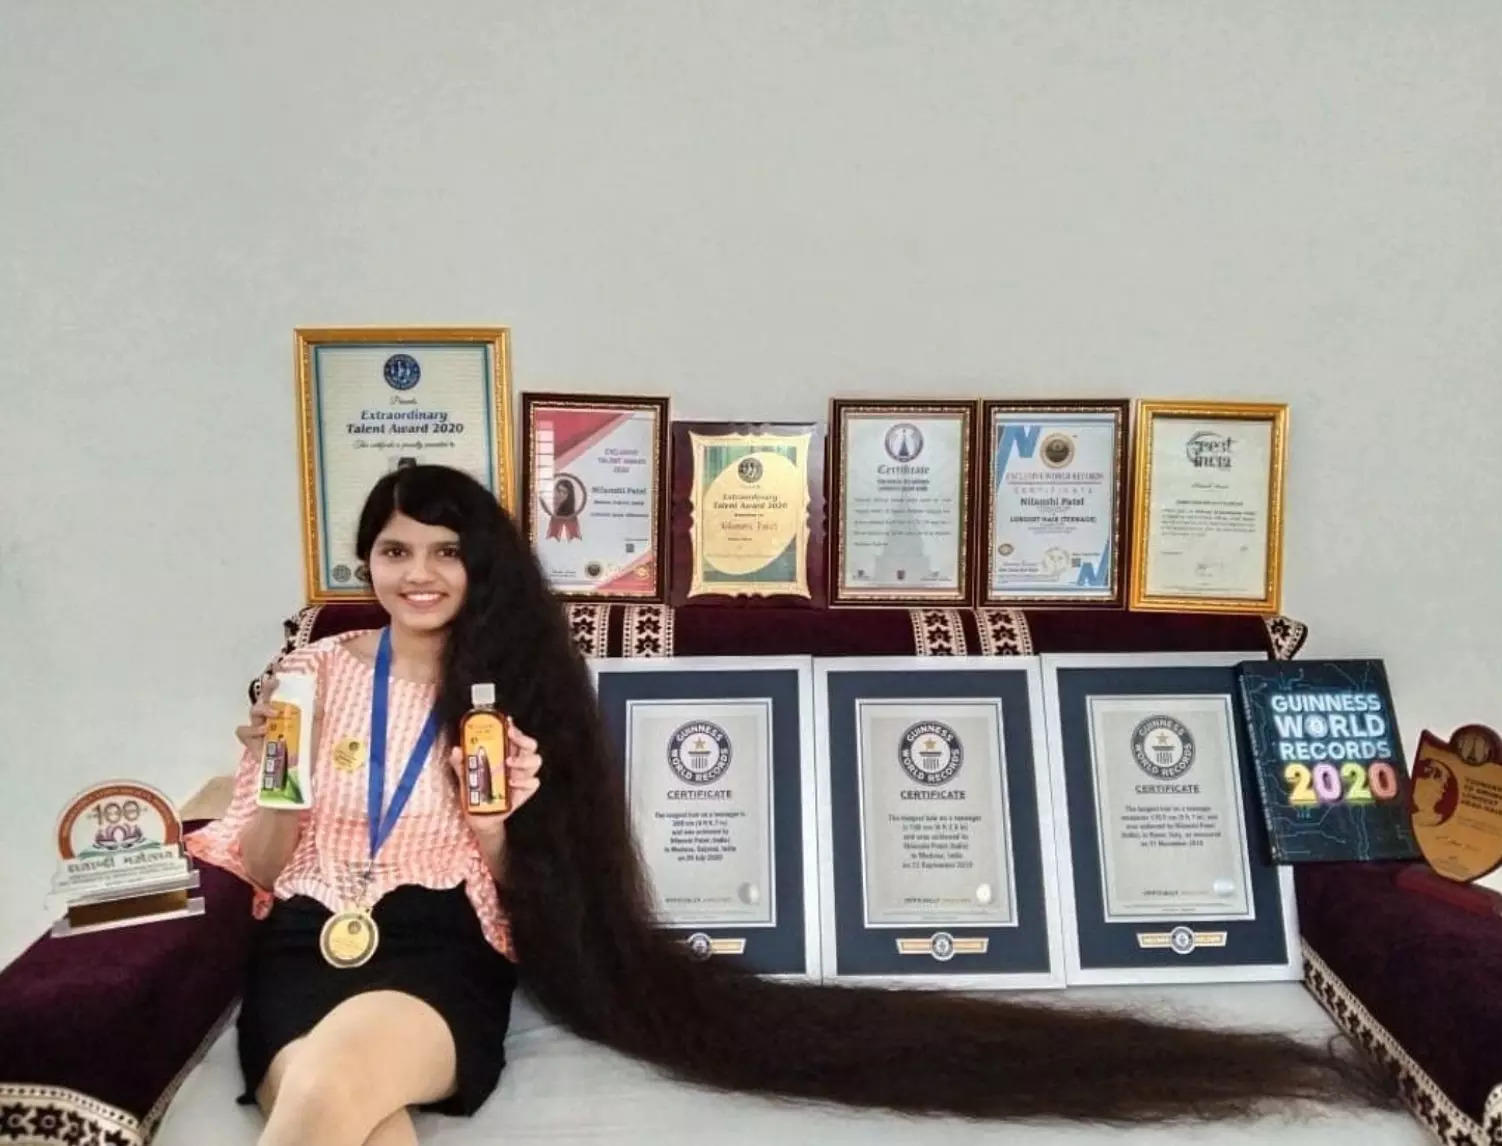  feet! Meet Indian Rapunzel who held Guinness record for 'longest hair  on a teen' for 3 years